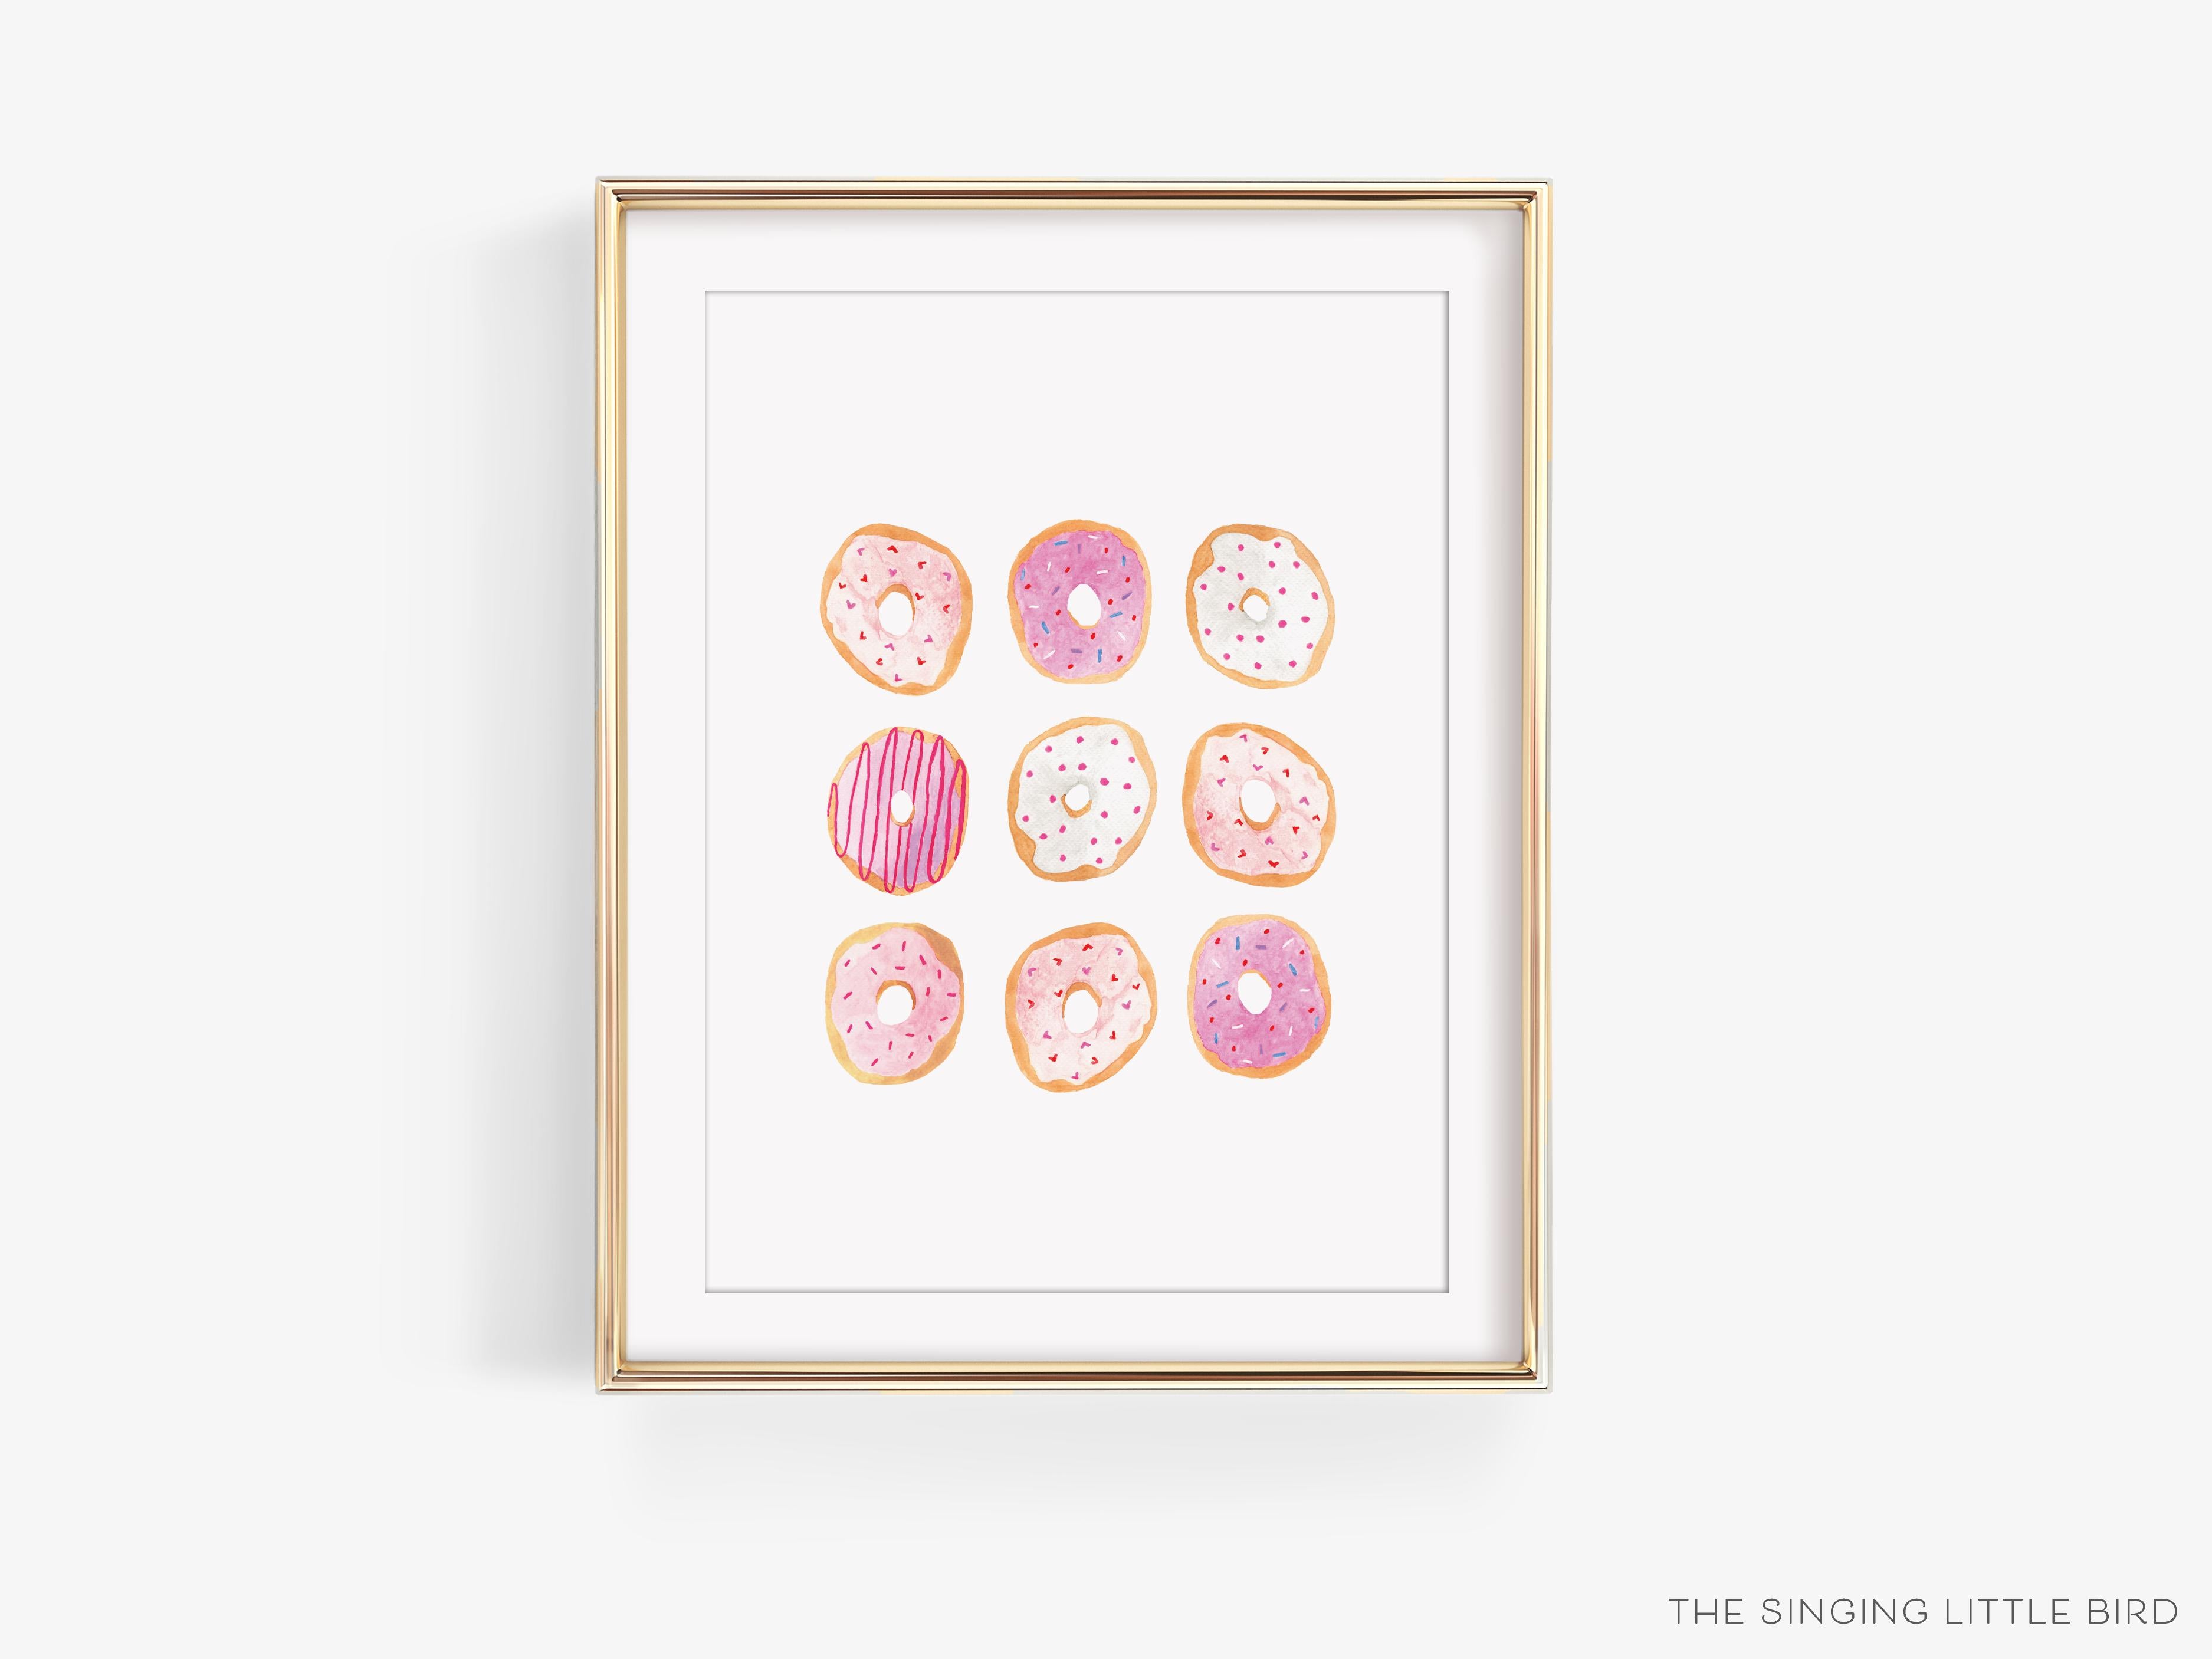 Donut Art Print-This watercolor art print features our hand-painted Donuts, printed in the USA on 120lb high quality art paper. This makes a great gift or wall decor for the sweet tooth lover in your life.-The Singing Little Bird